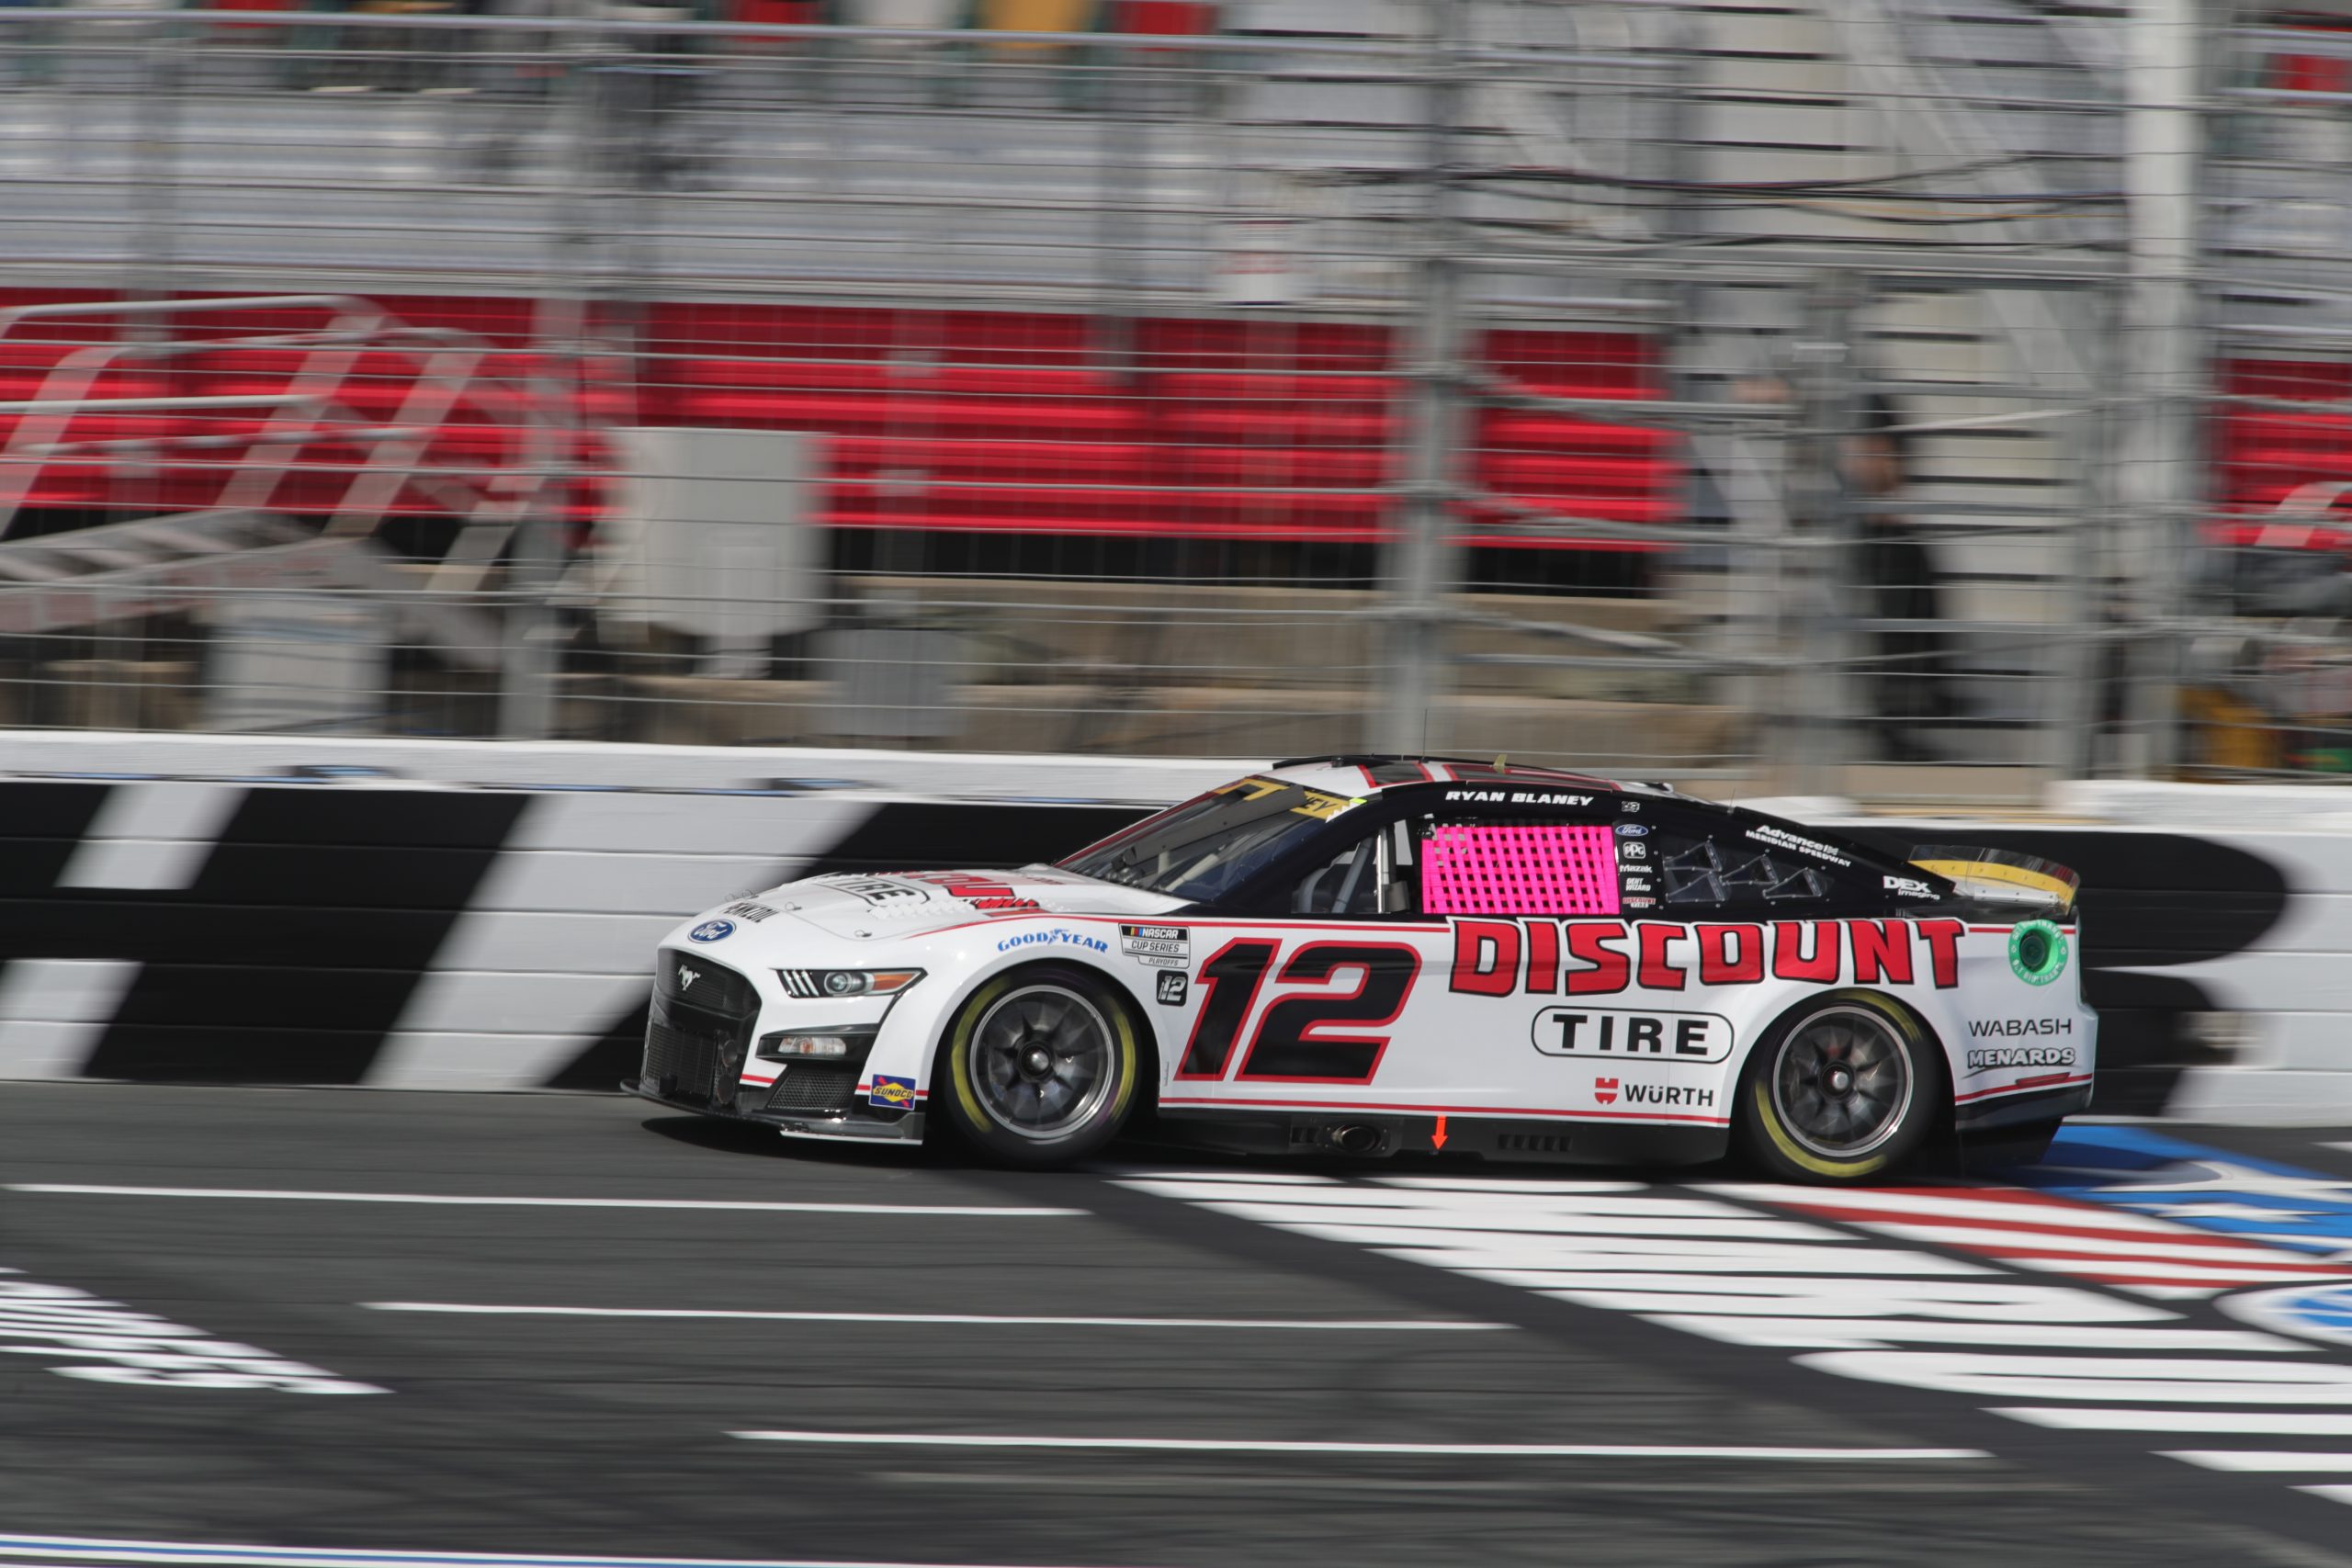 No, that is not Austin Cindric, but Blaney in the familiar Discount Tire colors. (Photo: Stephen Conley | The Podium Finish)